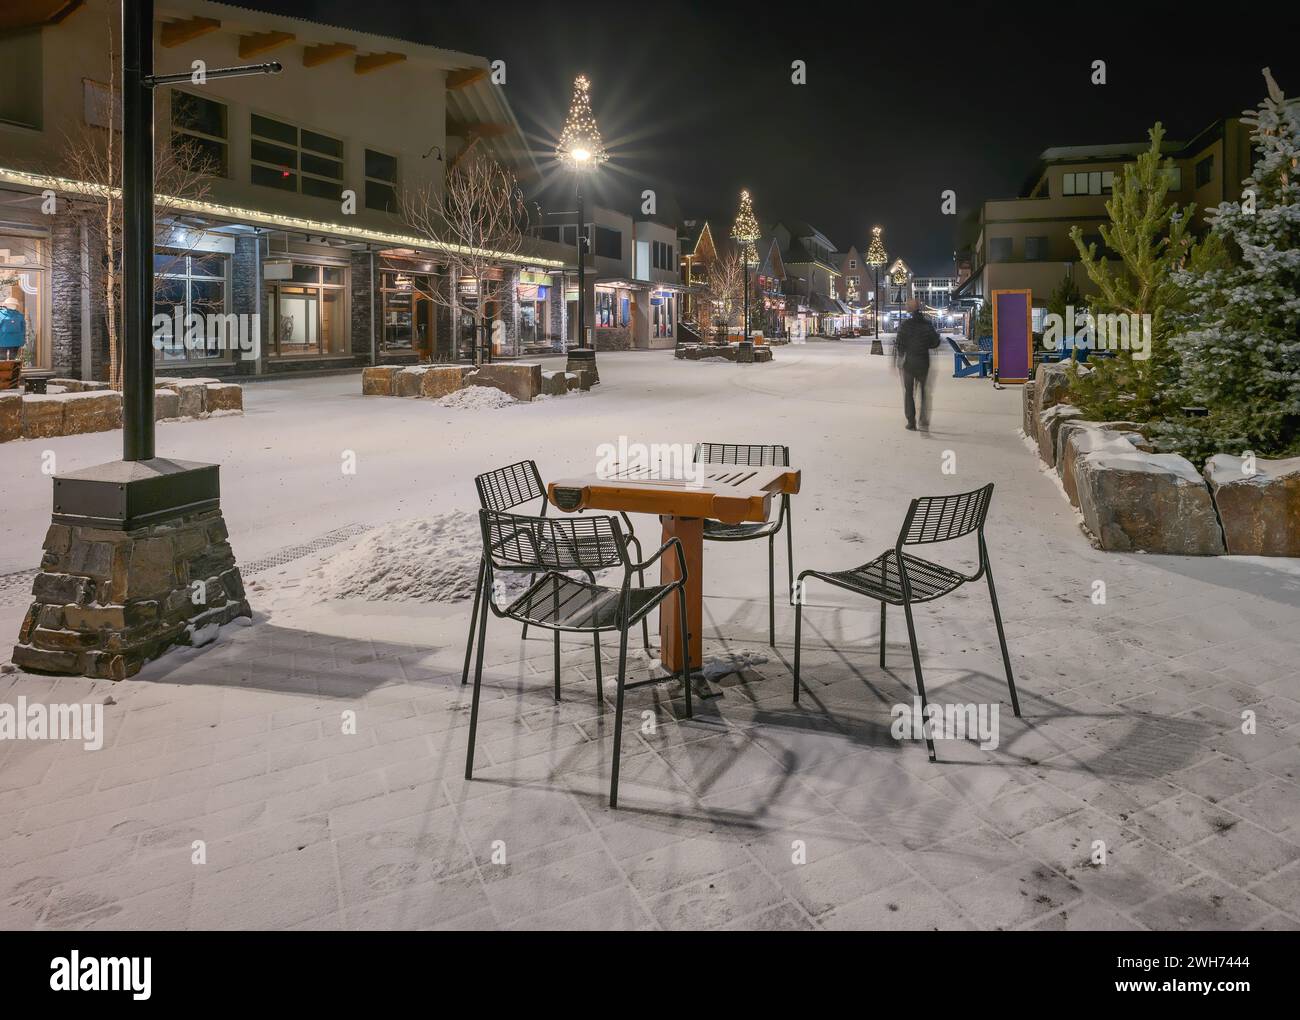 Table and chairs with a blurred person on Bear Street in Banff, Alberta, Canada Stock Photo